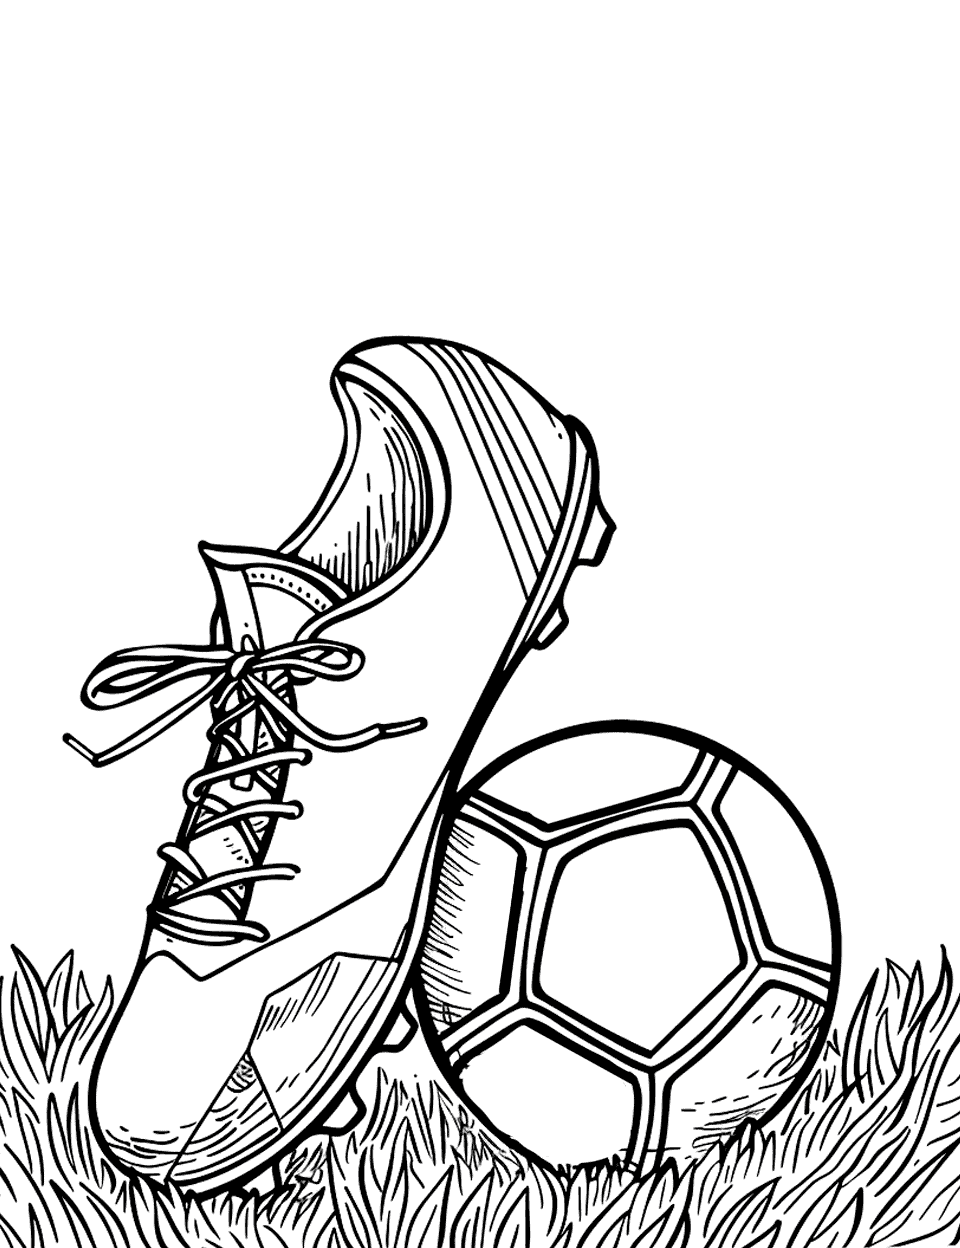 Soccer Cleat and Ball Coloring Page - A soccer cleat next to a soccer ball on the grass, ready for the game.